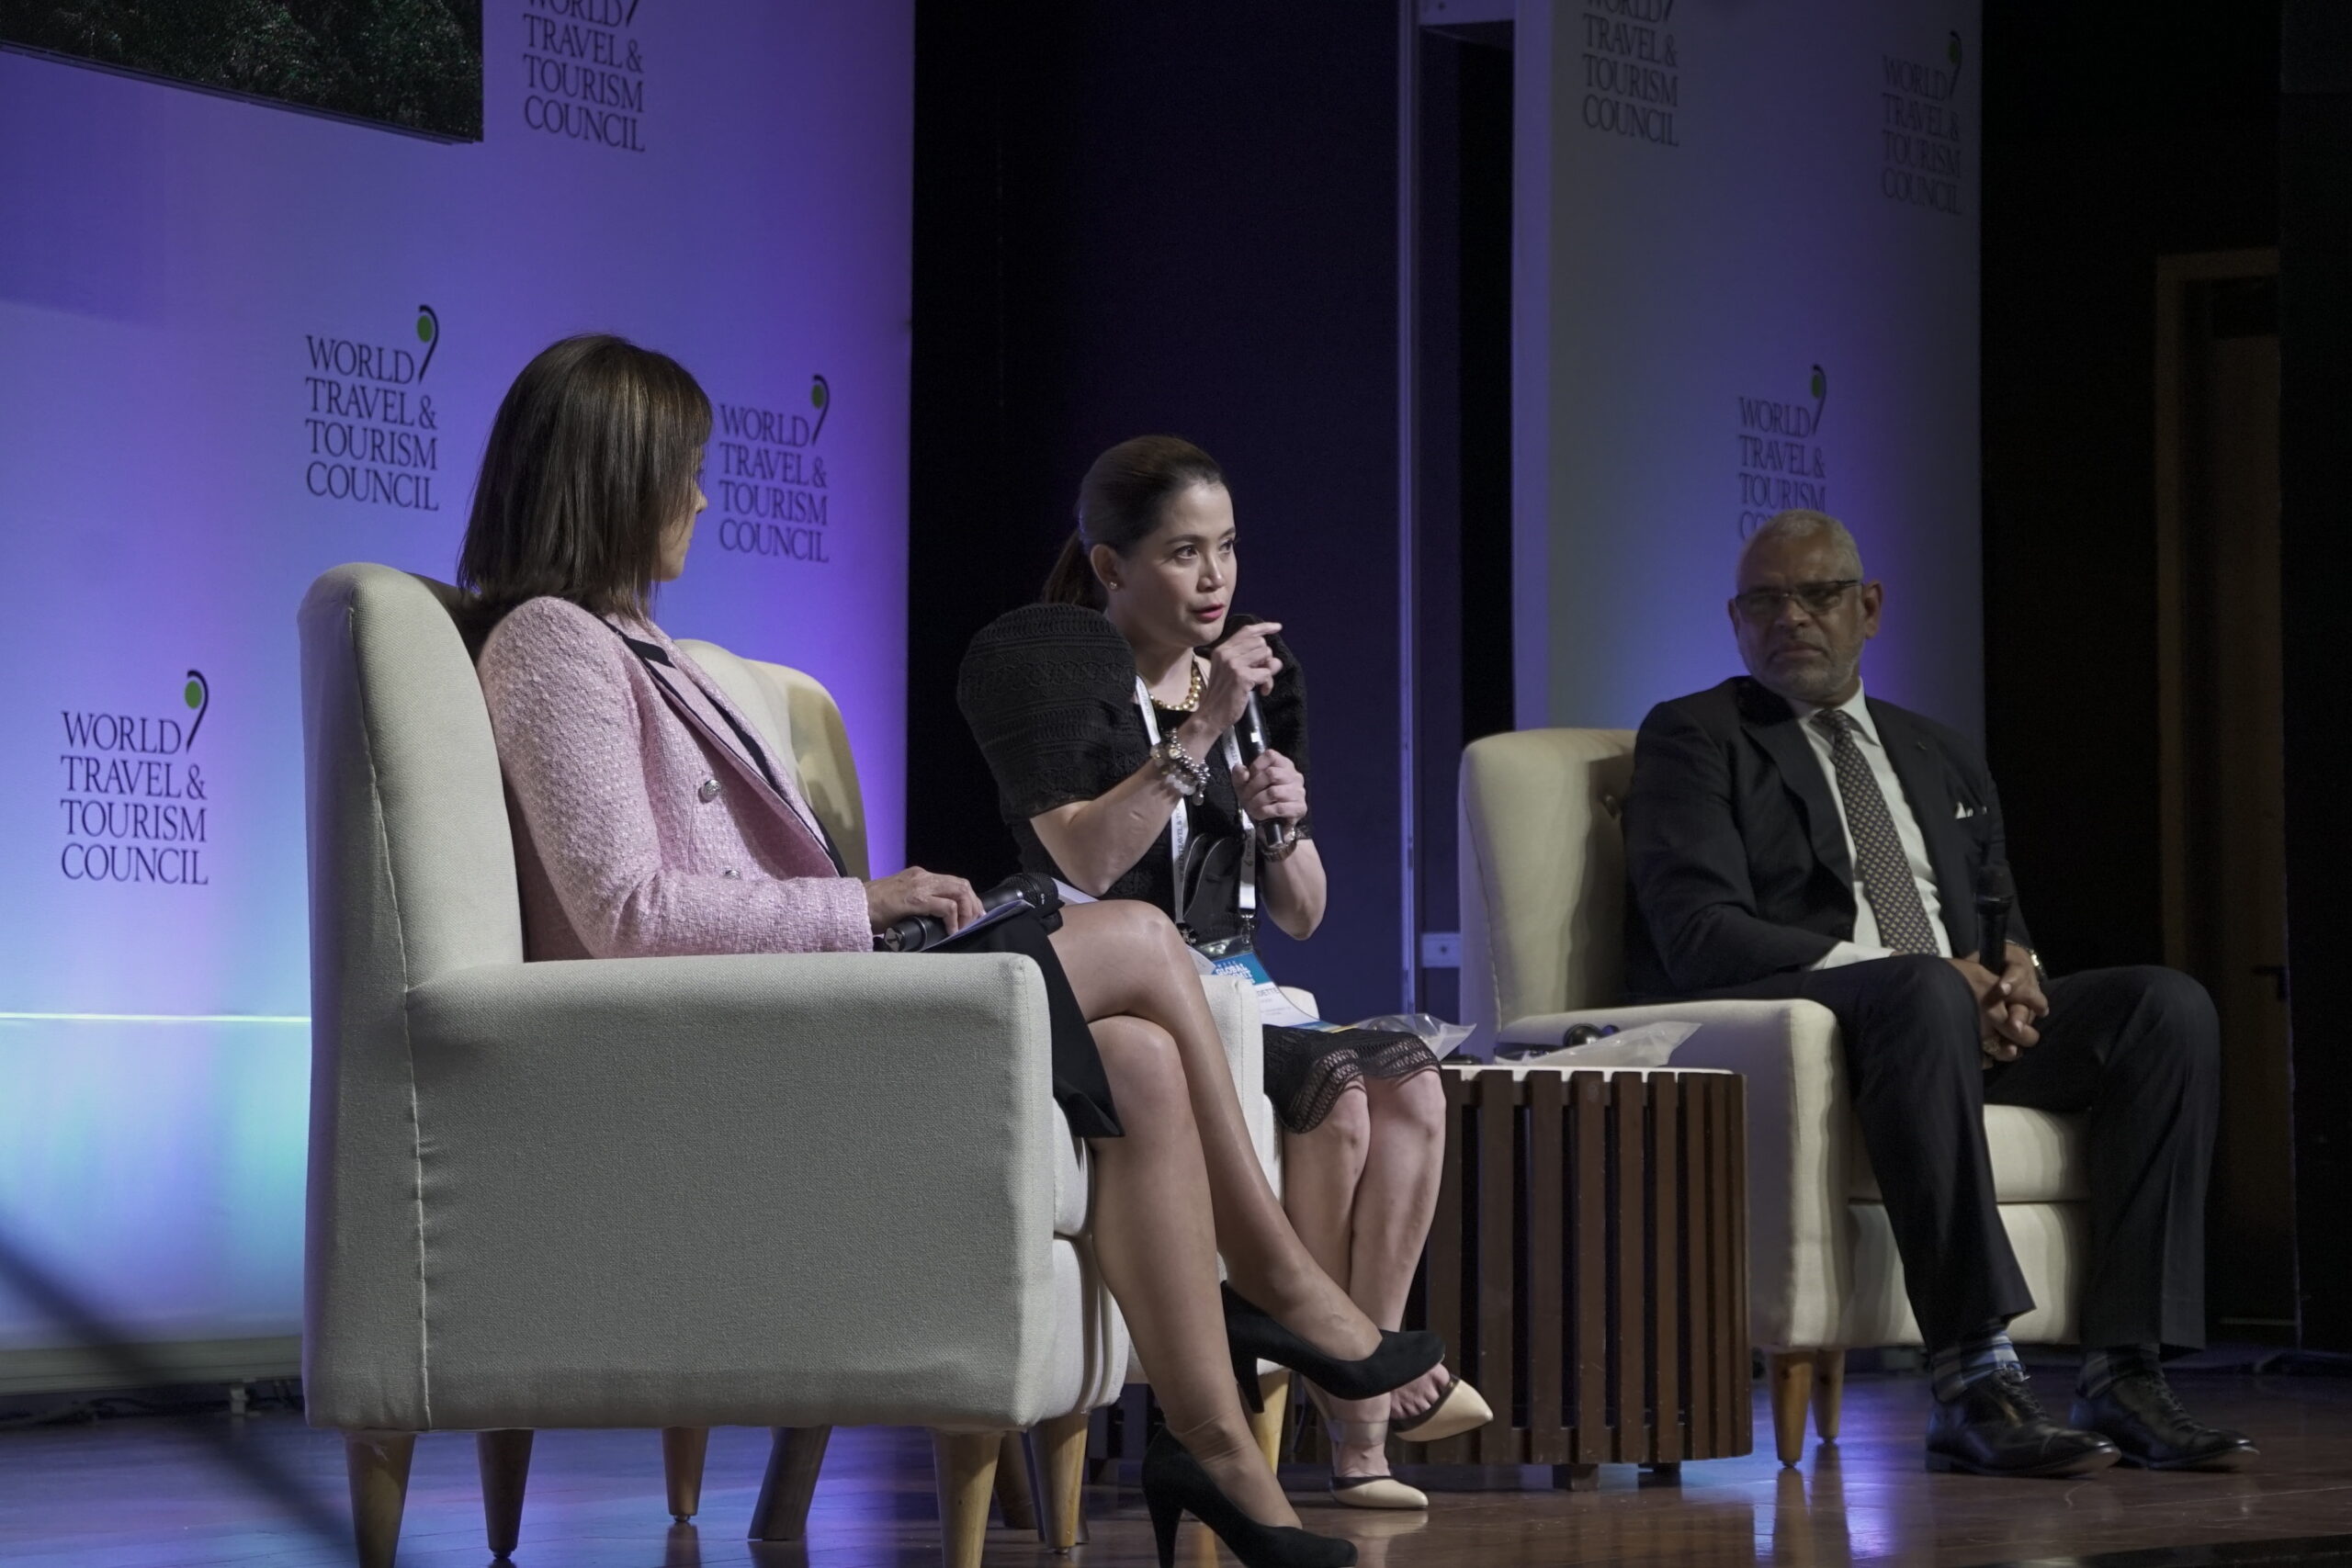 Global tourism leaders gather for “Rediscovering Travel” in Manila for WTTC Summit